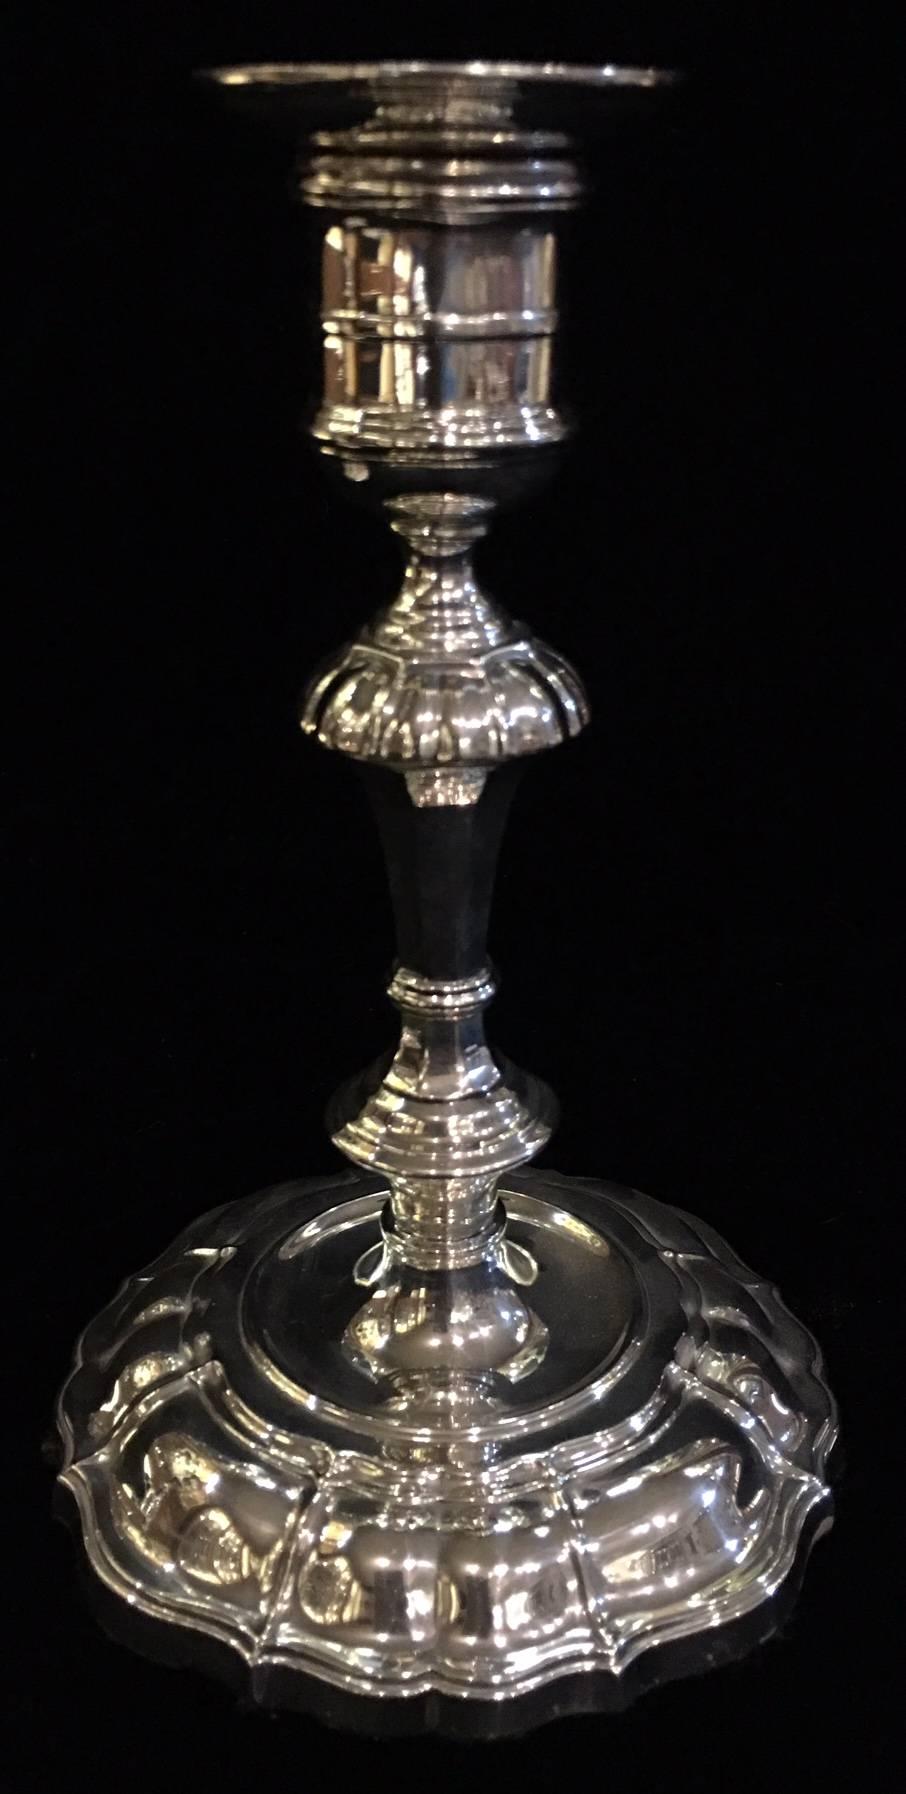 A fine pair of Sheffield Silver George III style candlesticks, circa 1897.